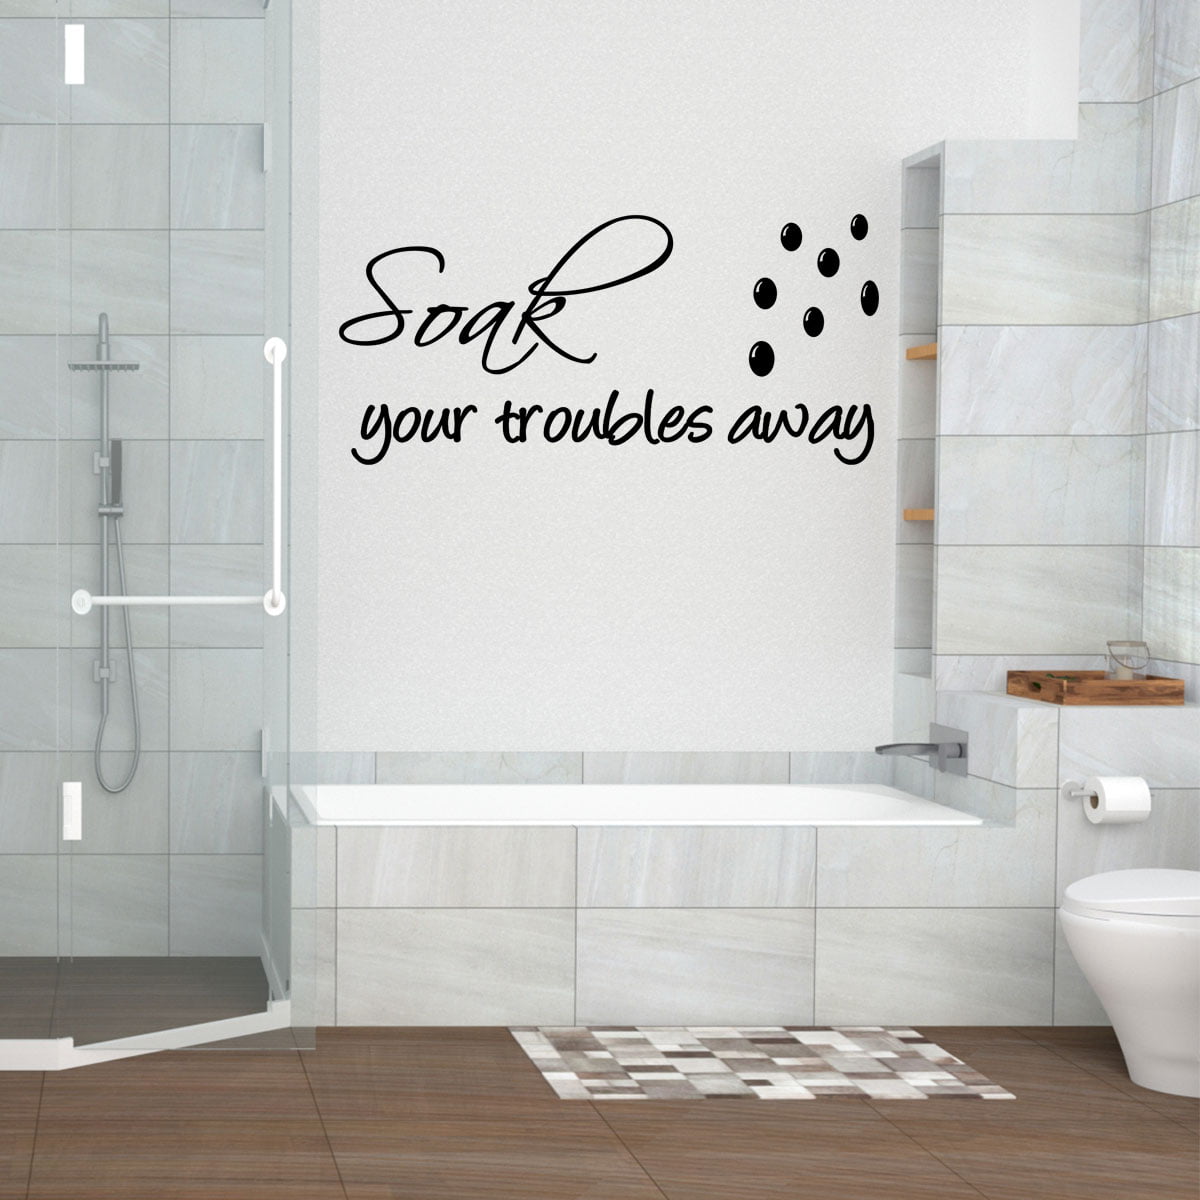 LAUNDRY... BATHROOM TOILET COOL WALL QUOTE VINYL STICKER STENCIL MURAL GRAPHIC 